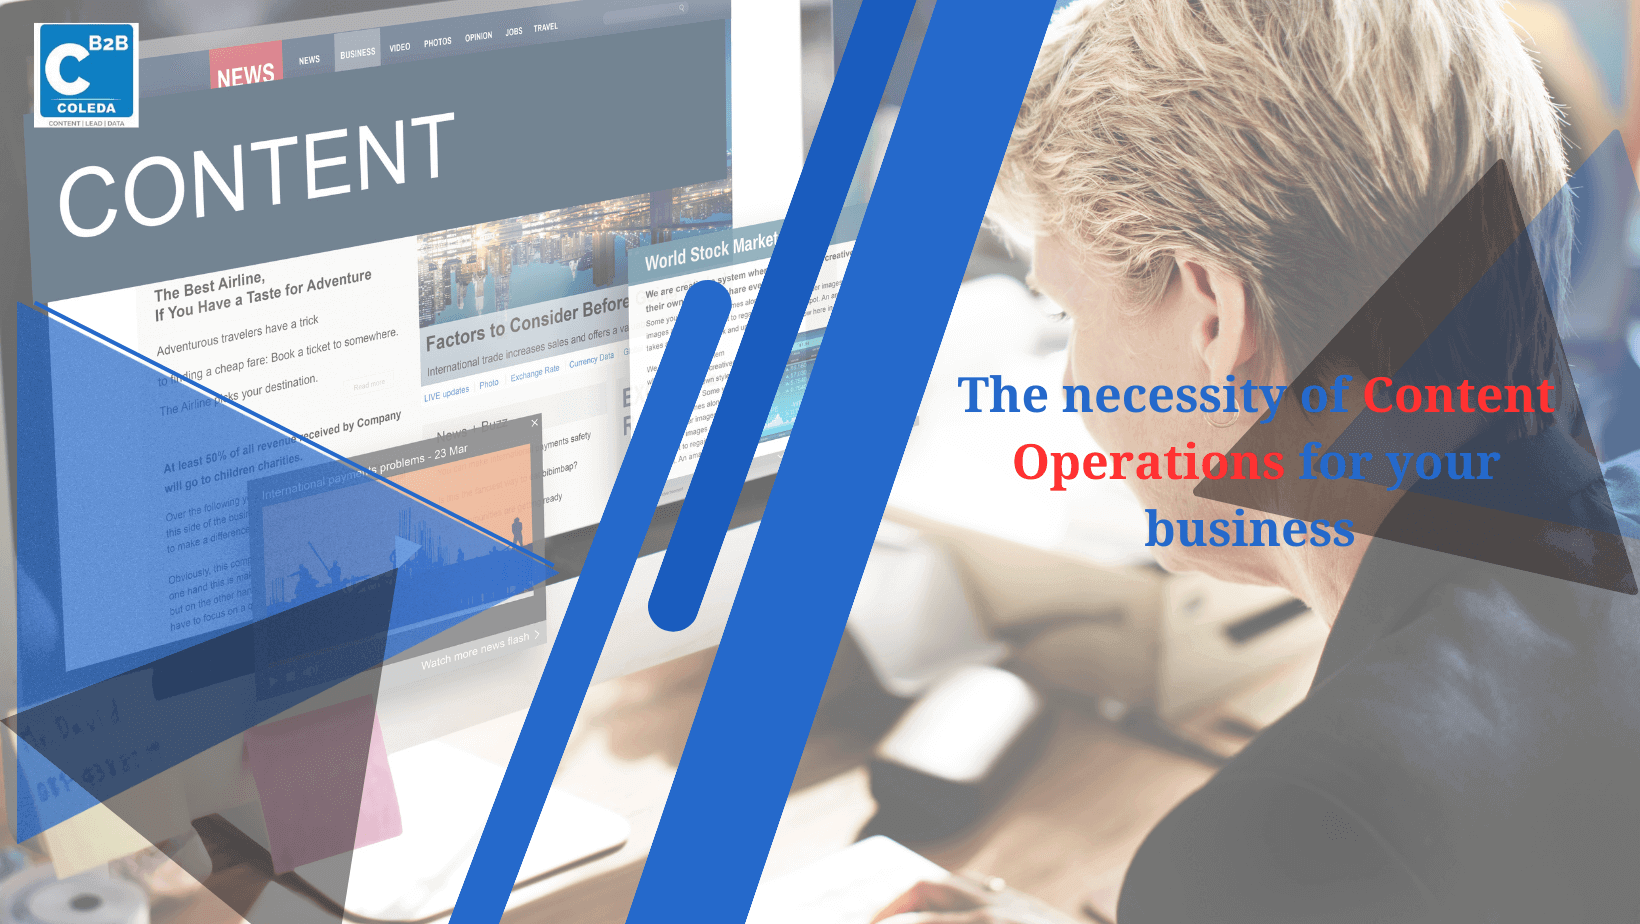 The necessity of Content Operations for your business